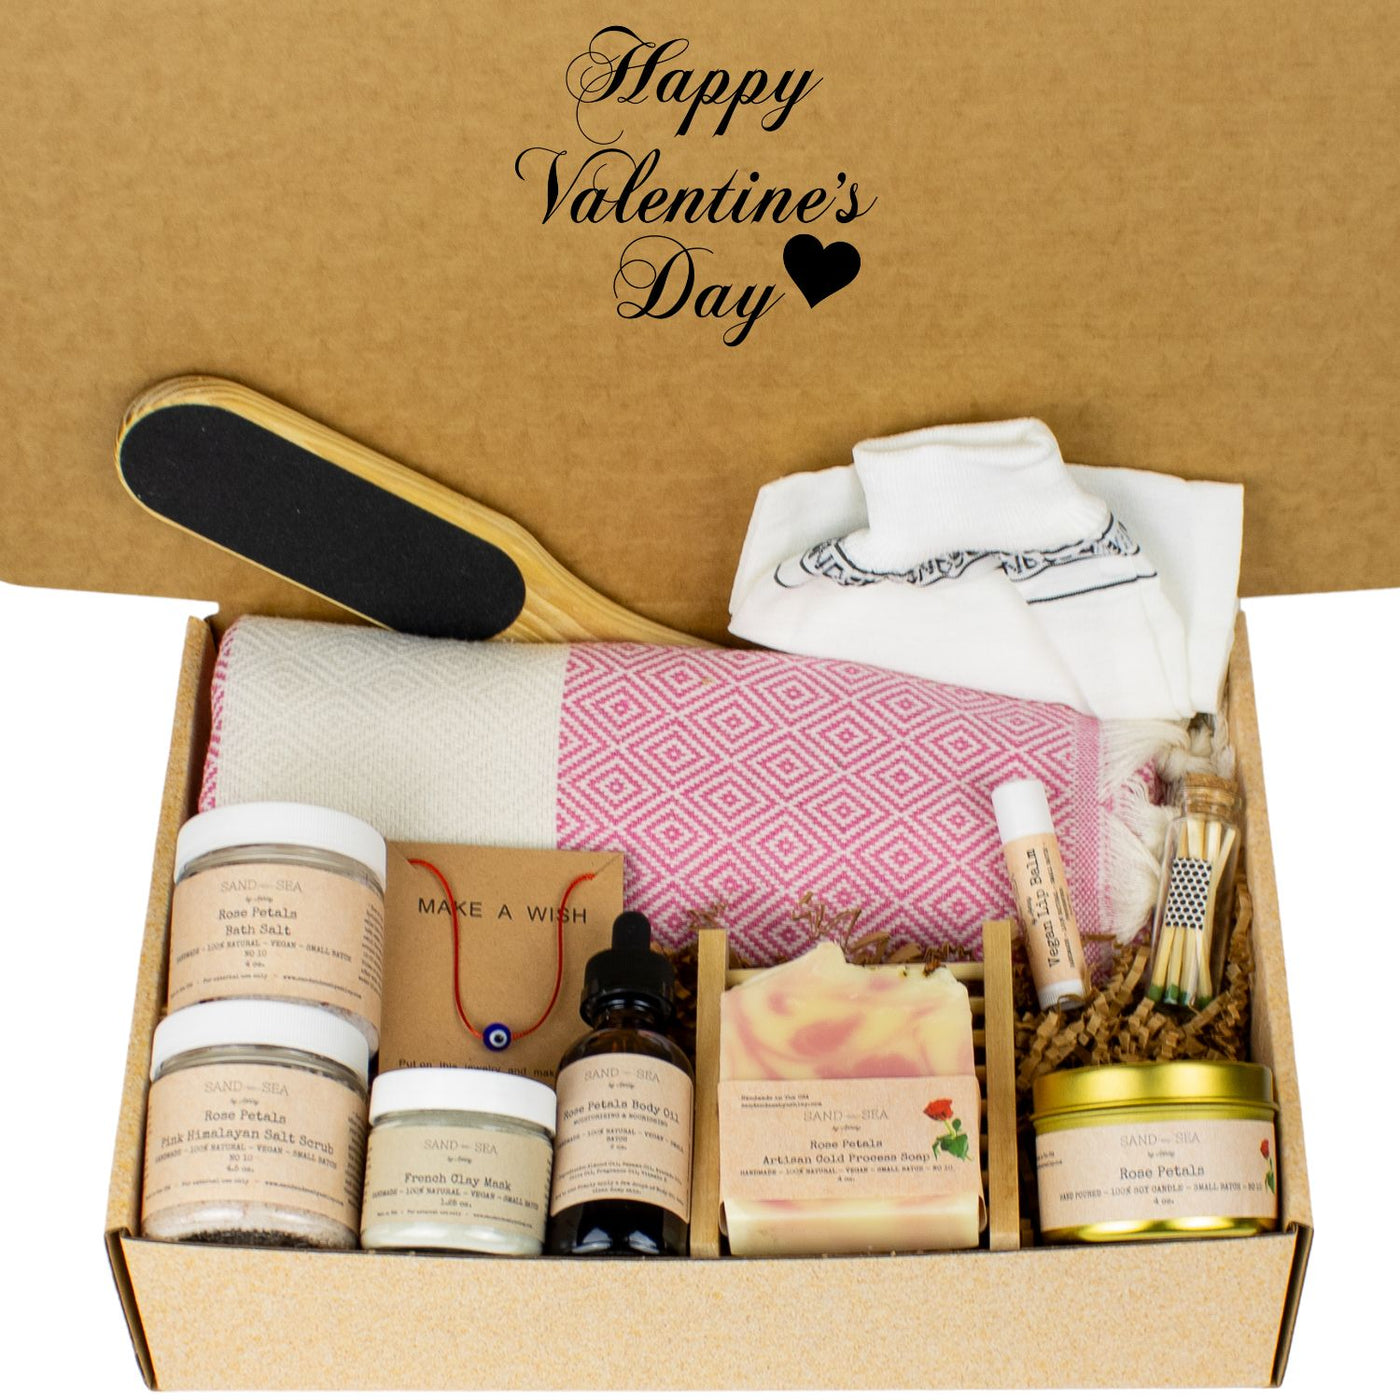 Valentine's Day Gift Box for Her - Handmade Rose Petals Spa Gift Set with Turkish Towel 13 pieces